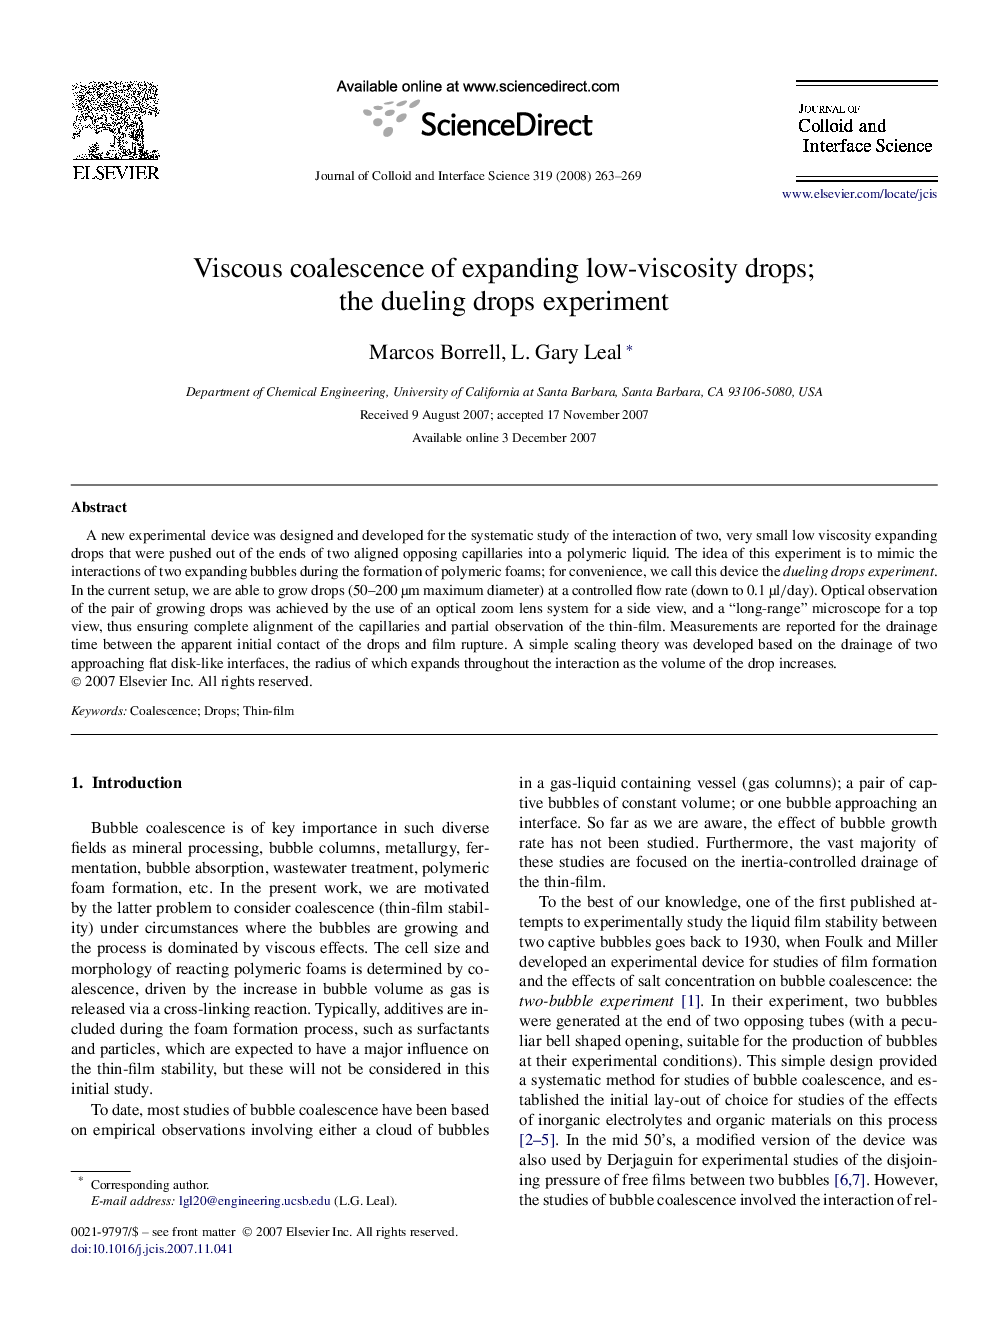 Viscous coalescence of expanding low-viscosity drops; the dueling drops experiment